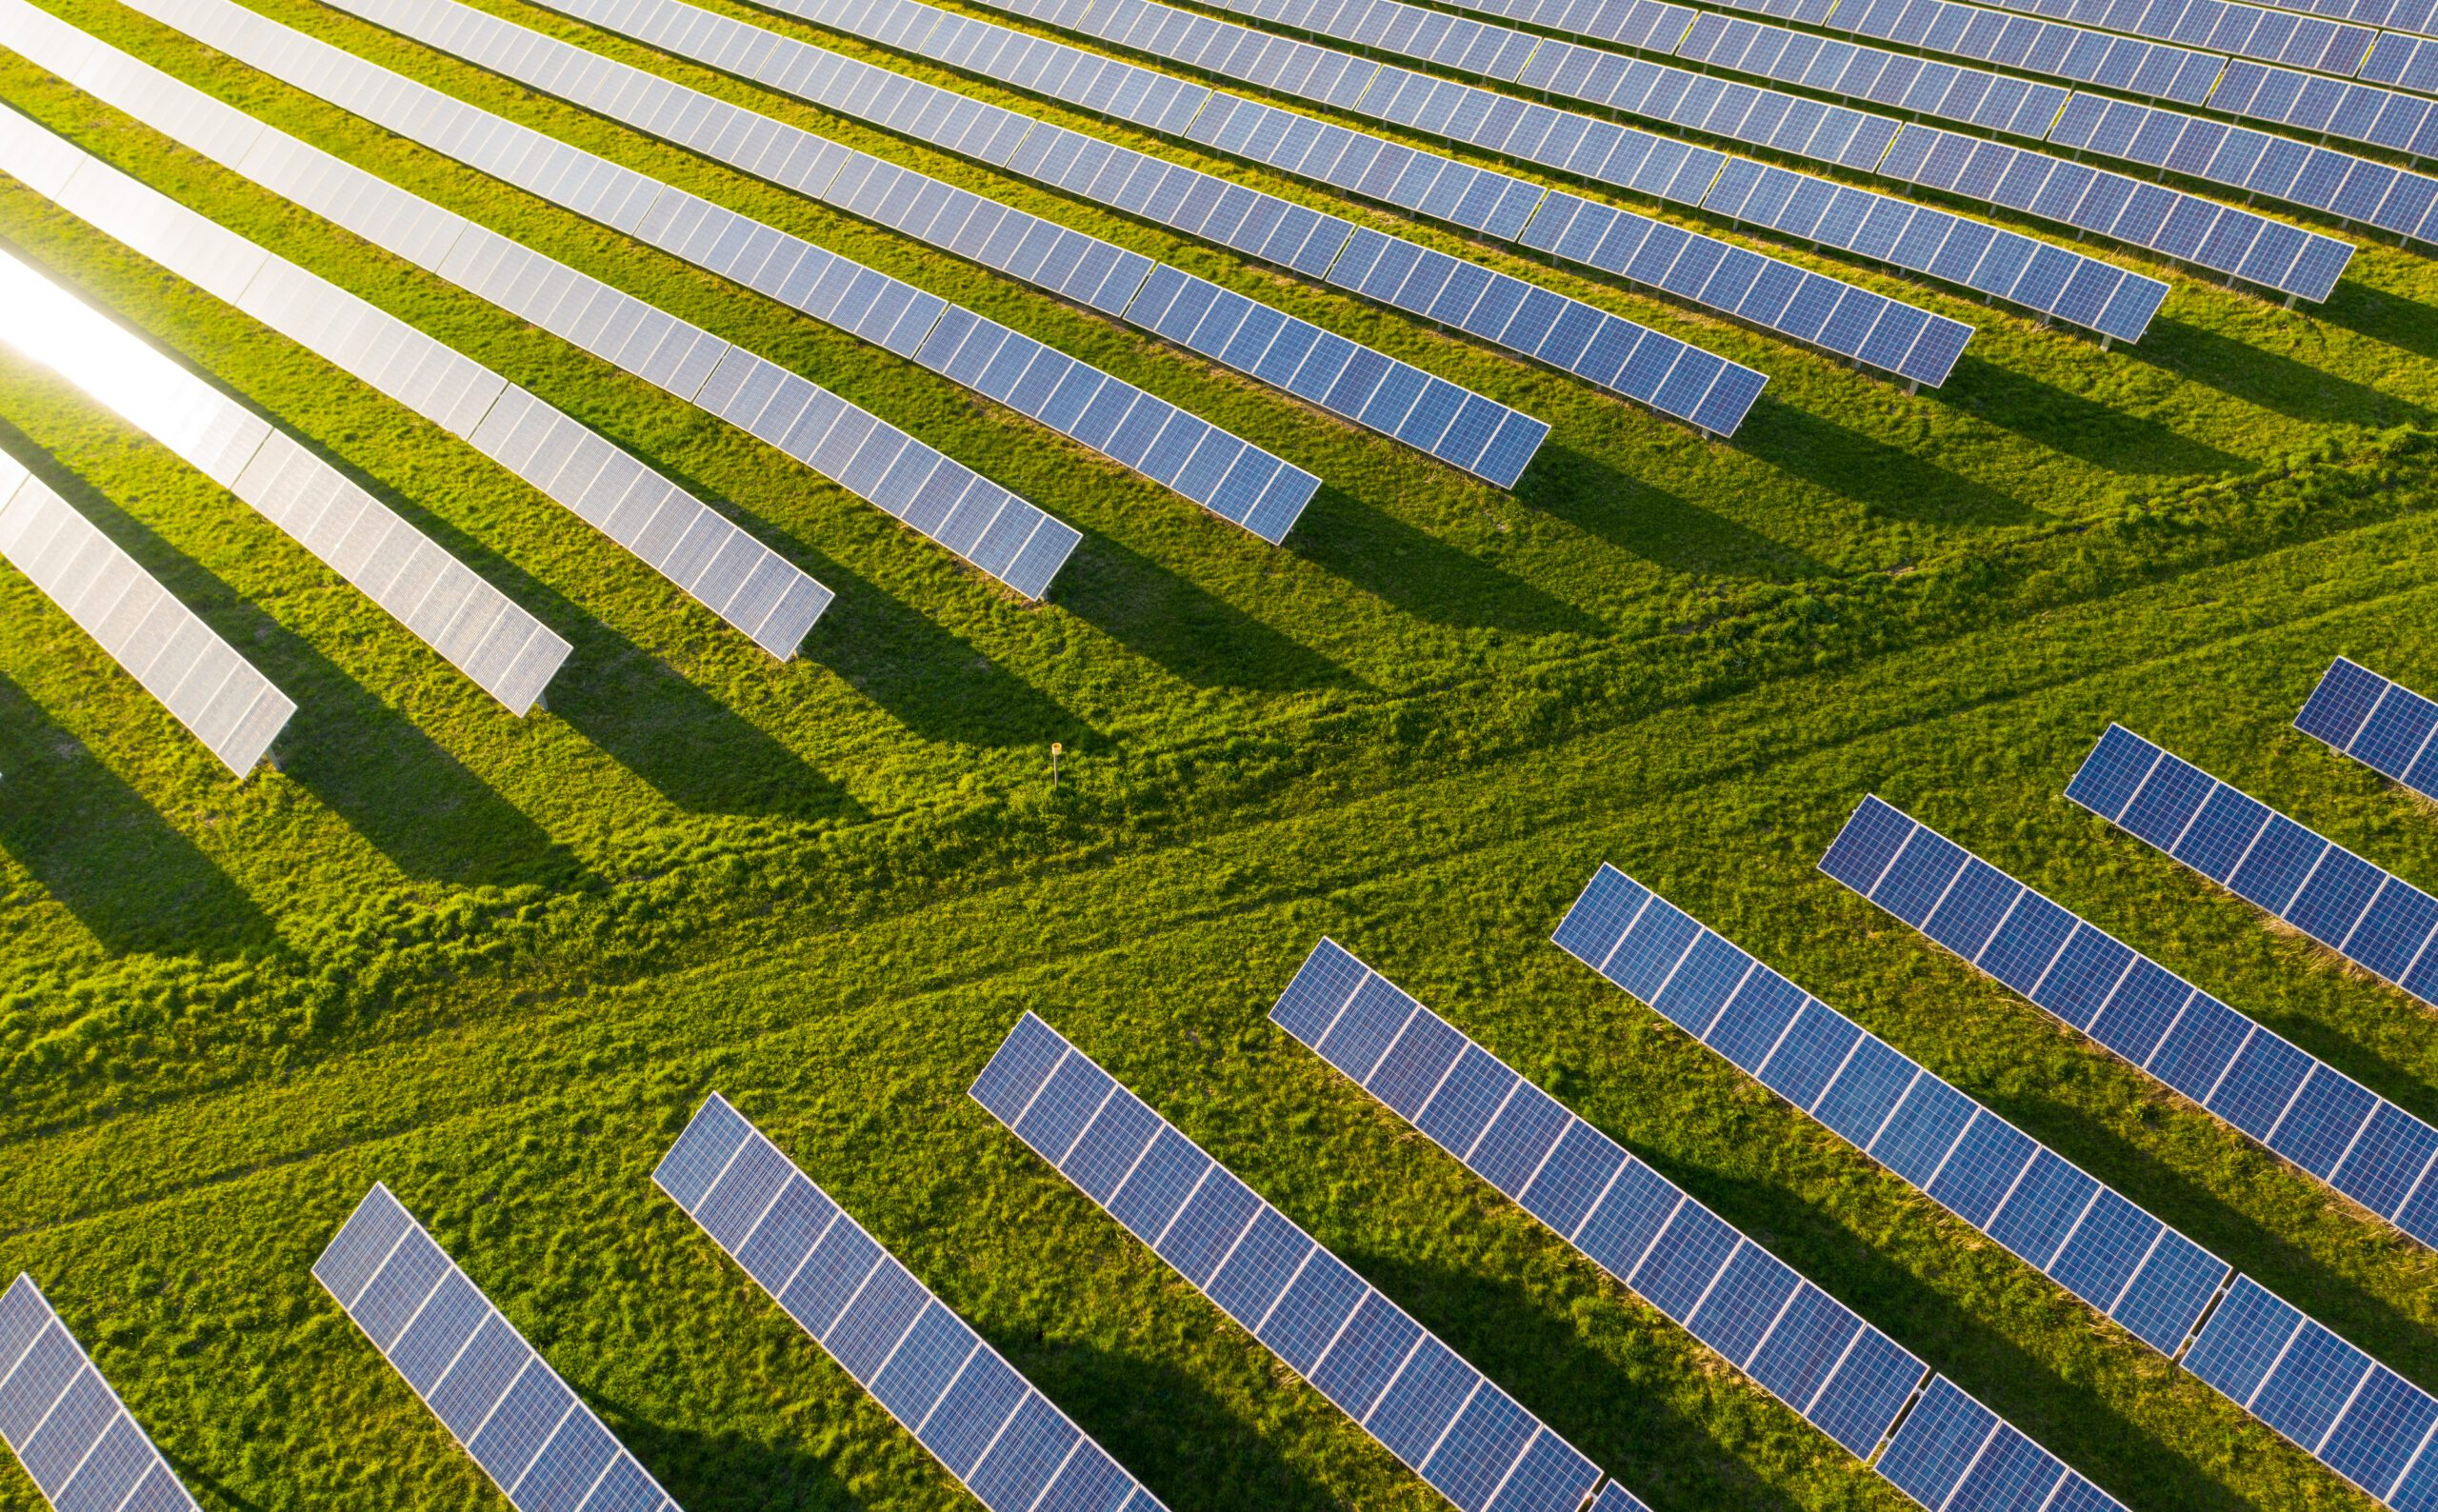 Rows of solar panels on a green field.